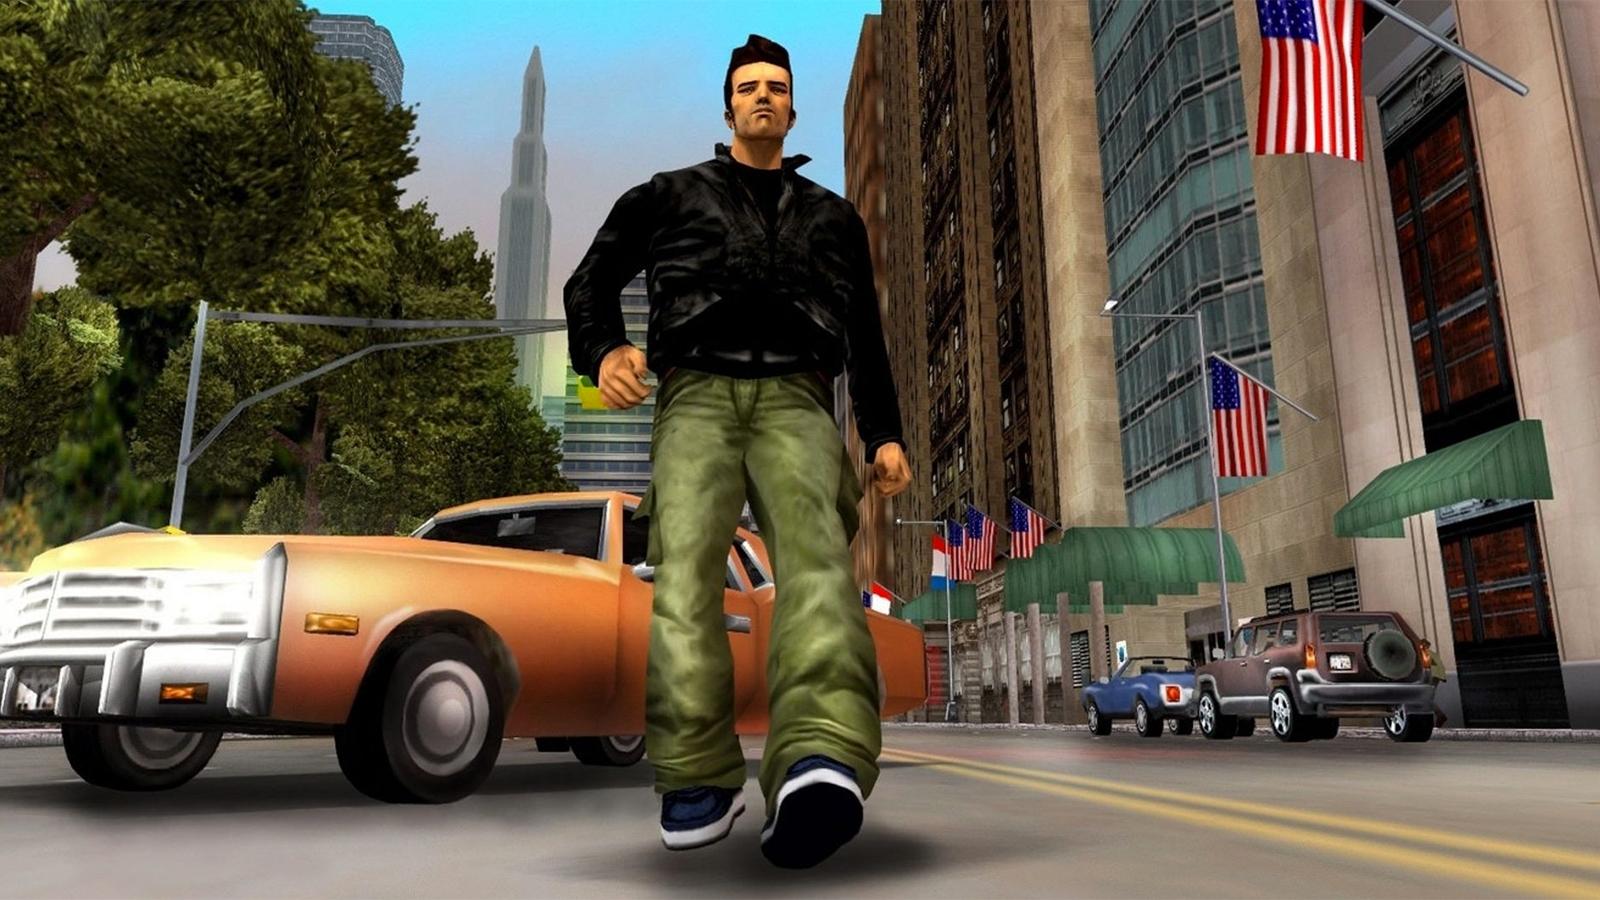 Claude standing in the streets of GTA 3